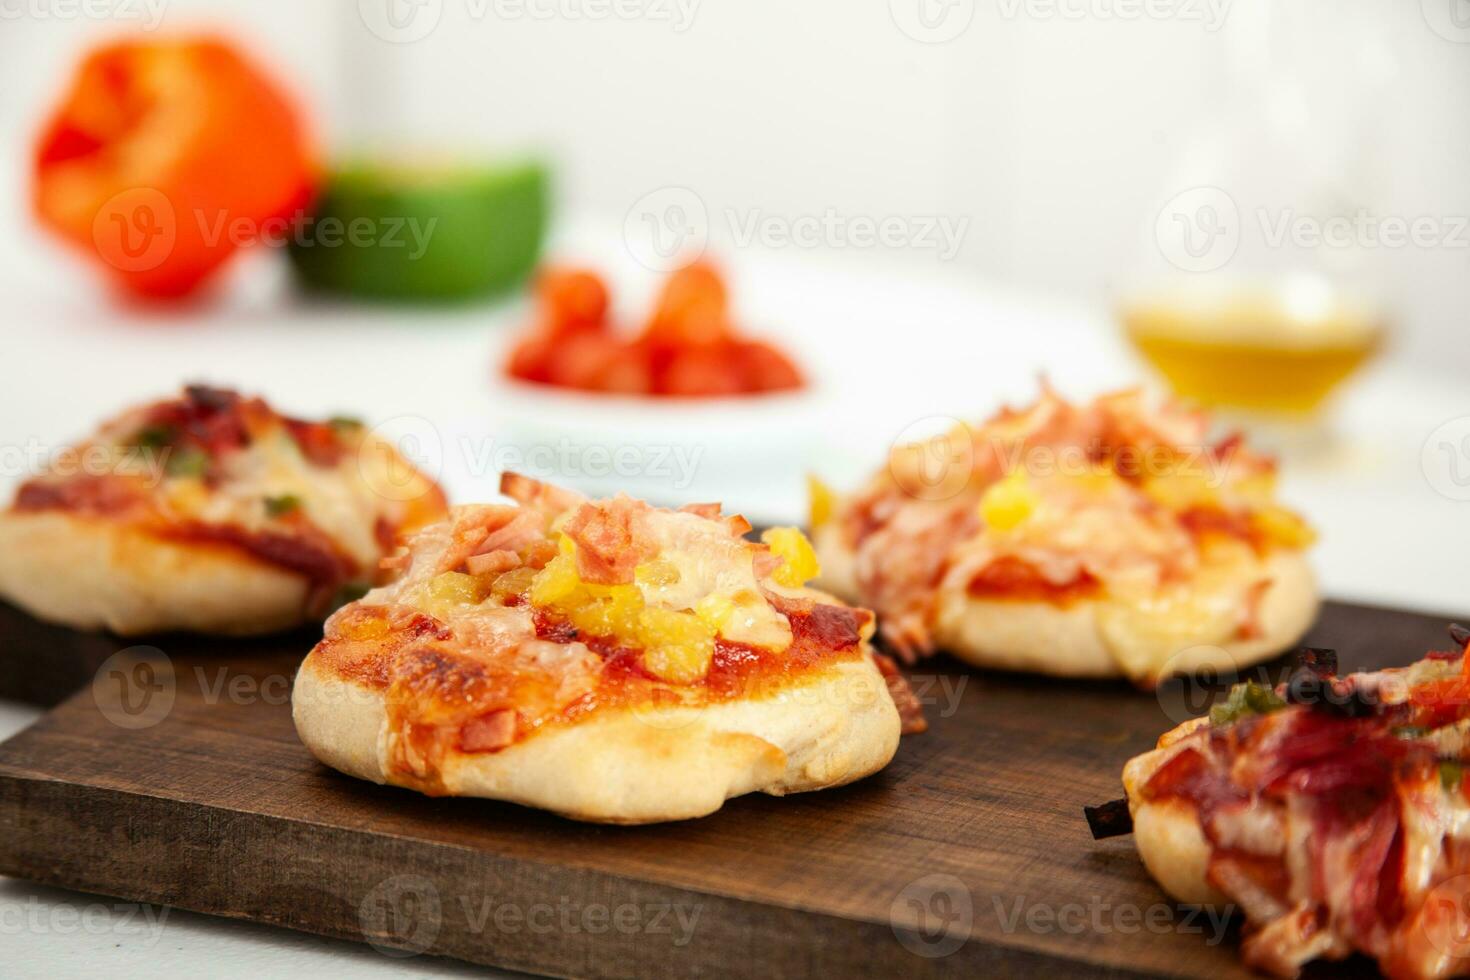 Delicious just baked homemade mini pizzas. photo